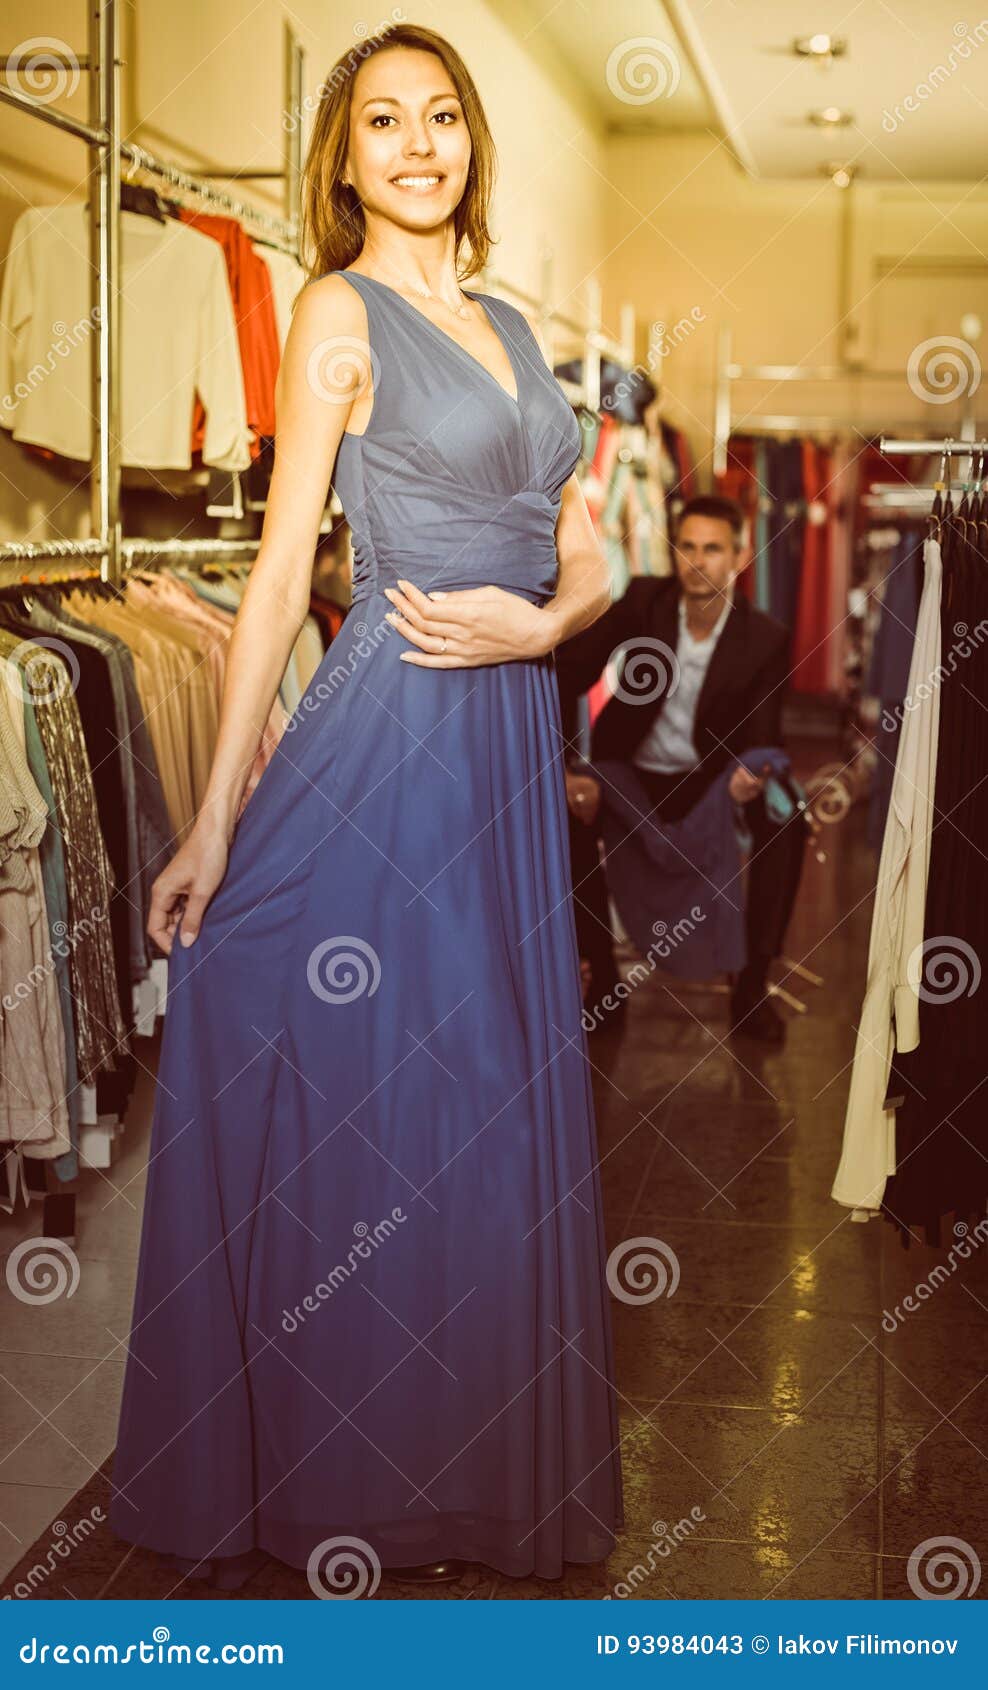 Cheerful Female is Trying on New Dark Blue Dress Stock Image - Image of ...